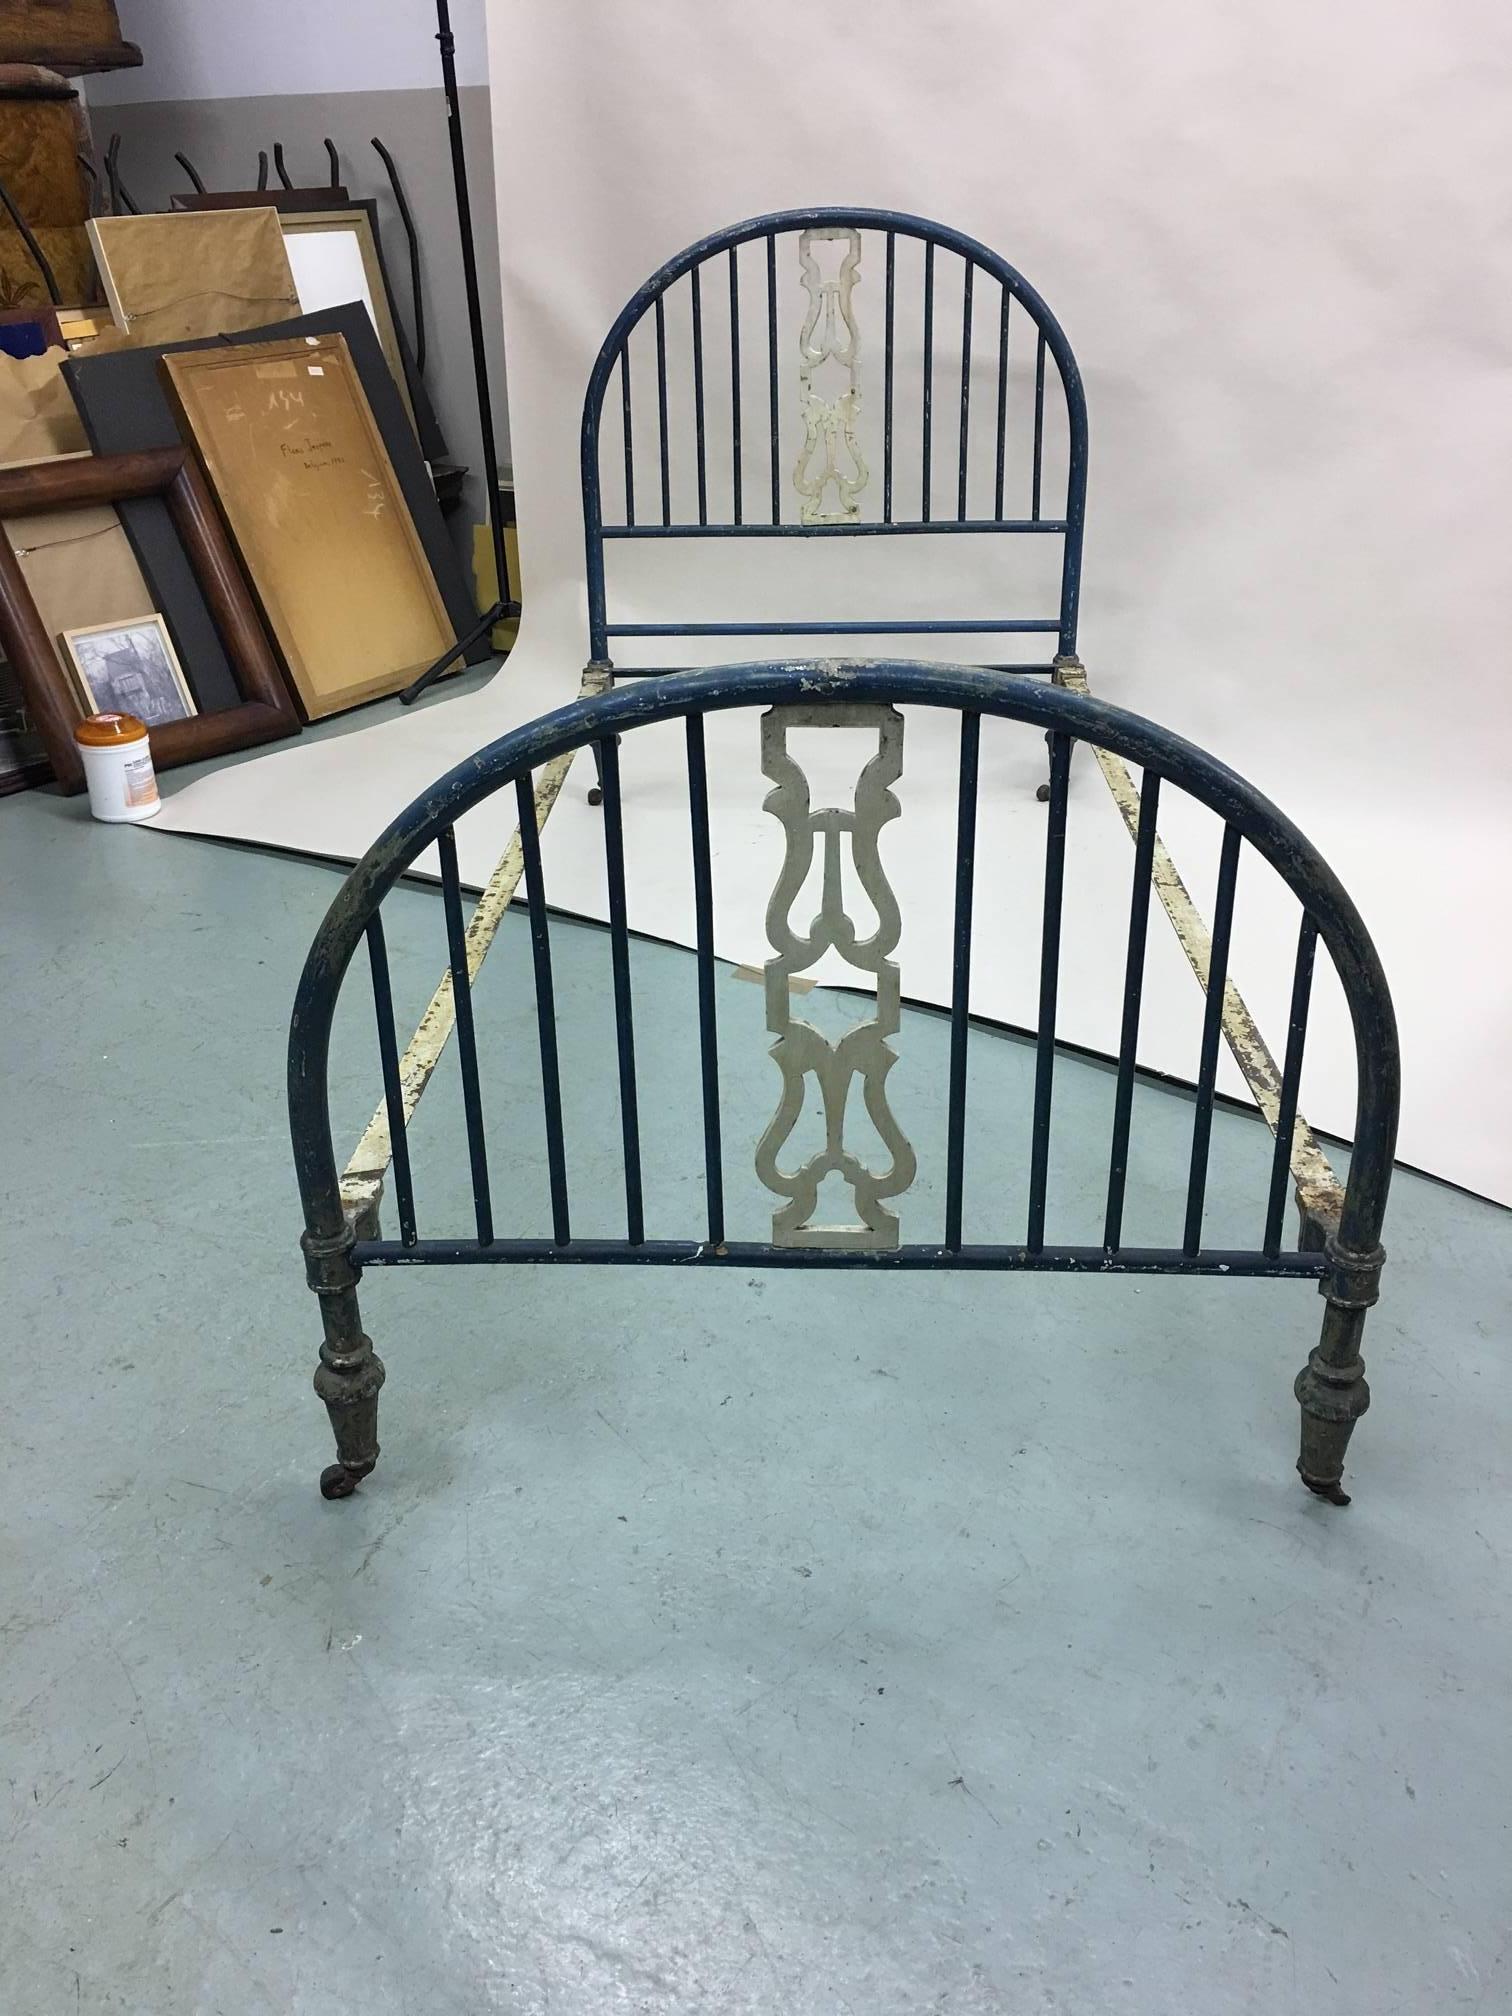 A French modern neoclassical iron bed with painted Frame, The central splat is in the form a lyre and reversed lyre and the four round tapering feet are in the Directoire style.

Naturally distressed with a wonderful patina. 

This will